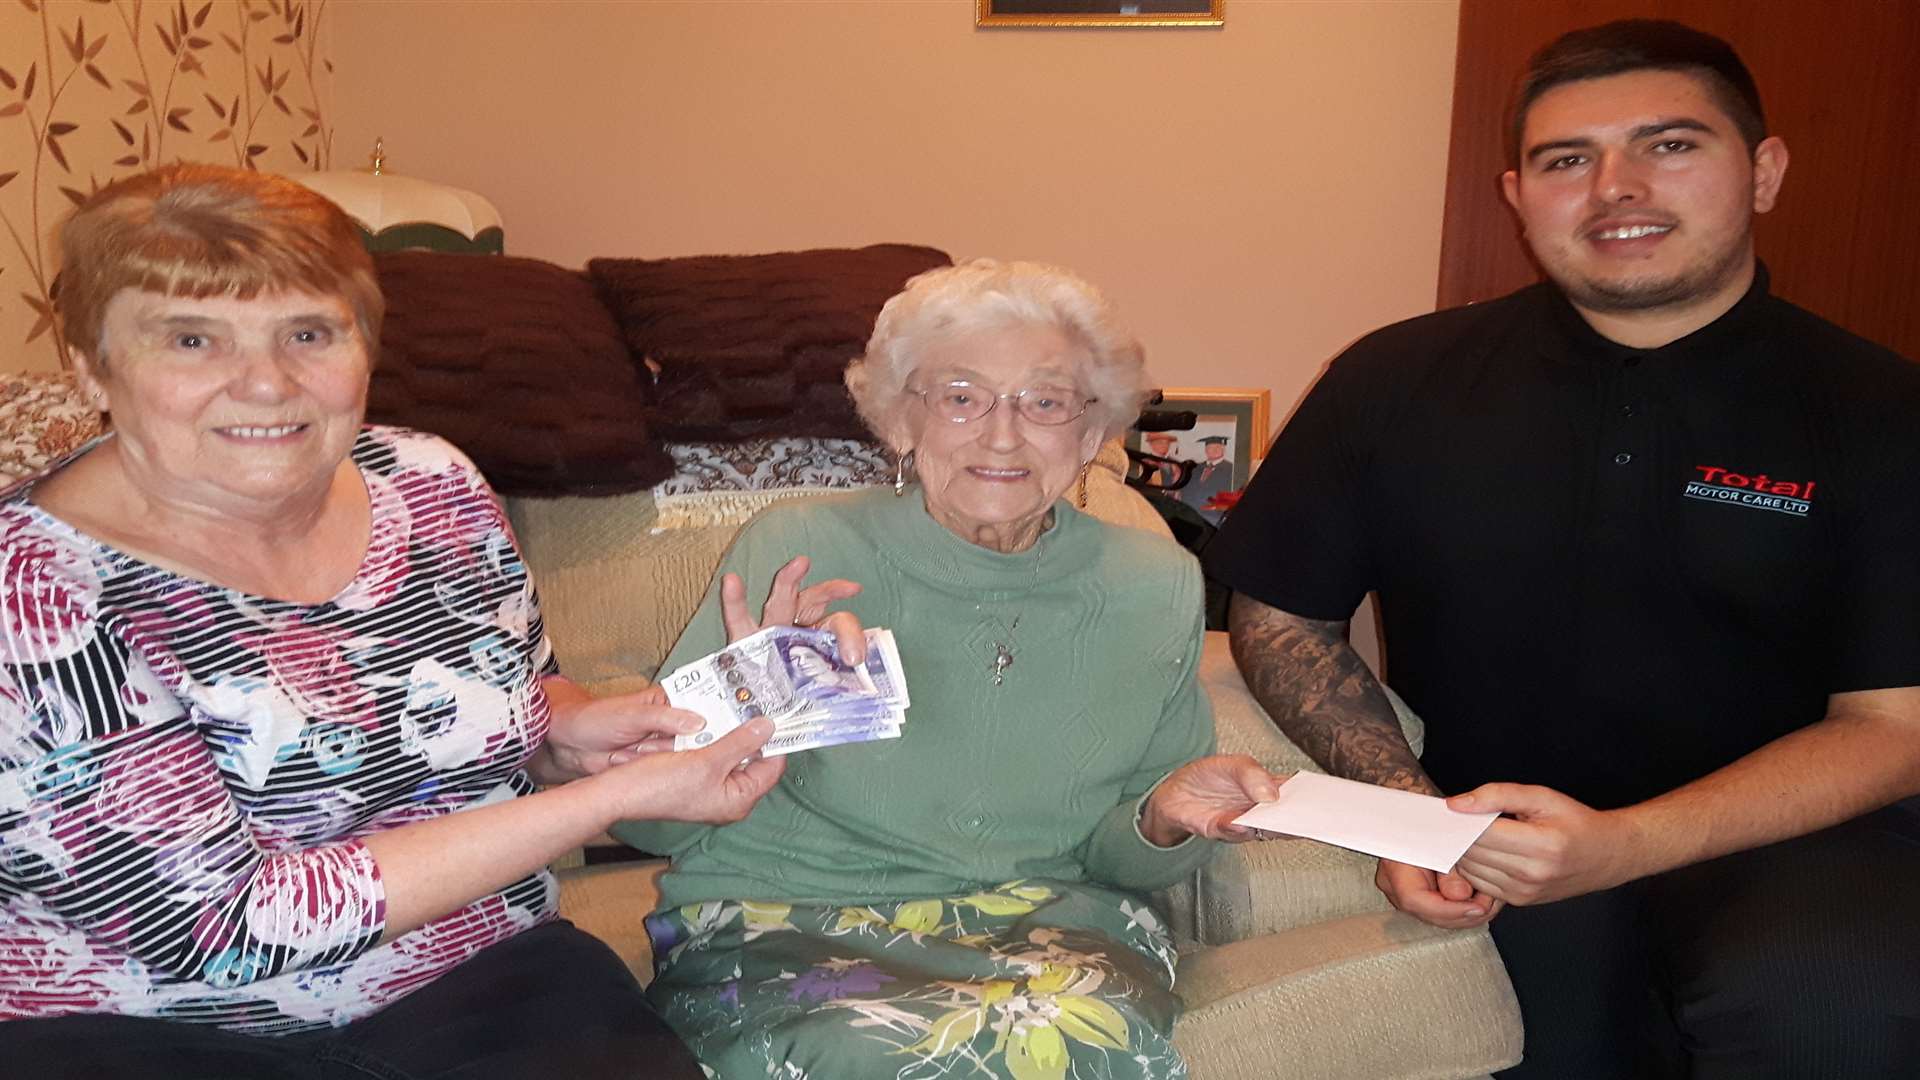 Well-meaning readers Margaret Edwards of Deal Icebreakers and Dan Reid on behalf of Total Motor Care have reimbursed Margaret Philpott (centre) after she had £100 stolen from her purse in a Deal charity shop